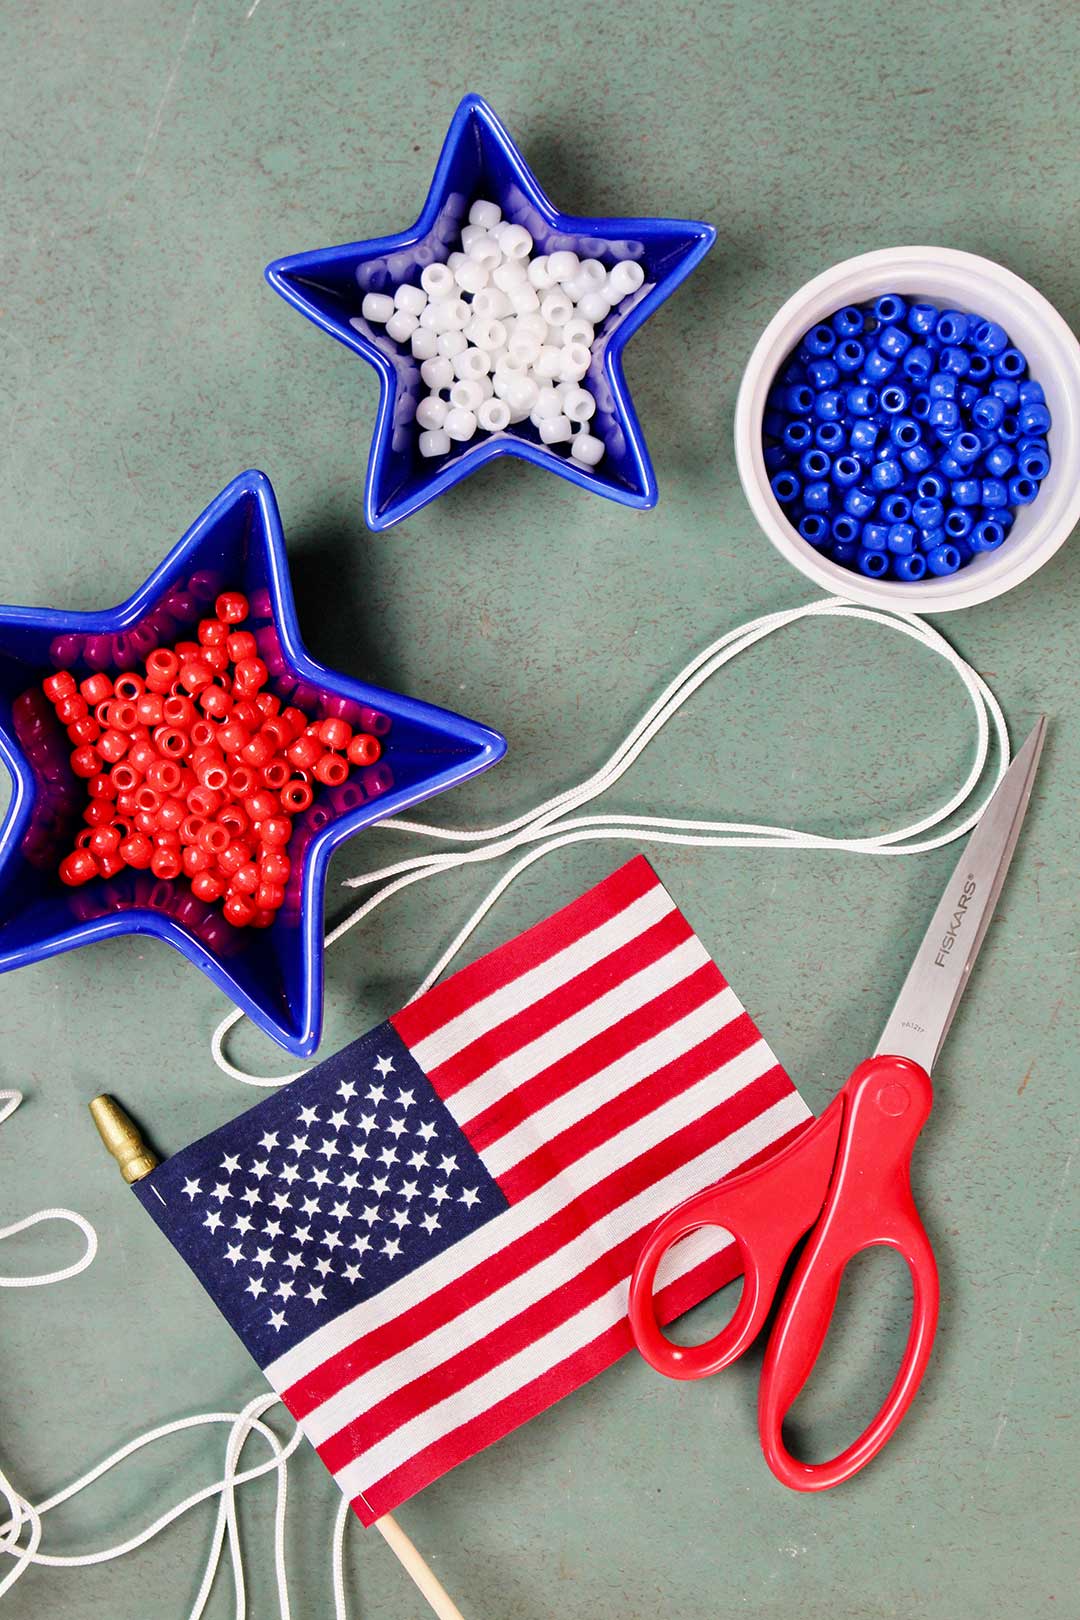 Three dishes of red, white and blue pony beads resting near white chord, a small American flag and a red pair of scissors.